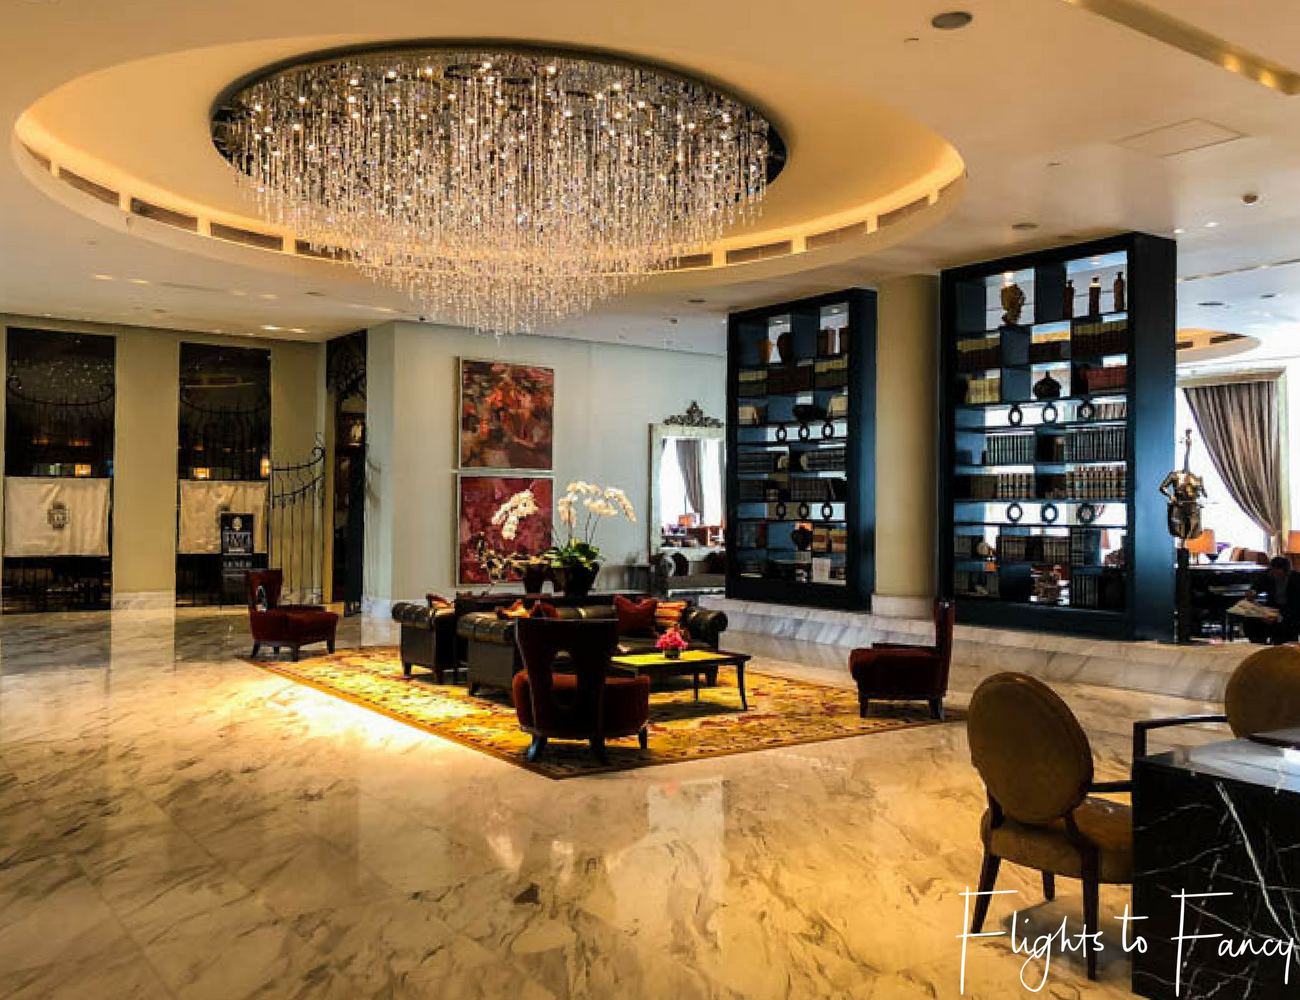 Flights To Fancy at Raffles Makati - The lobby of one of the finest luxury hotels in Manila